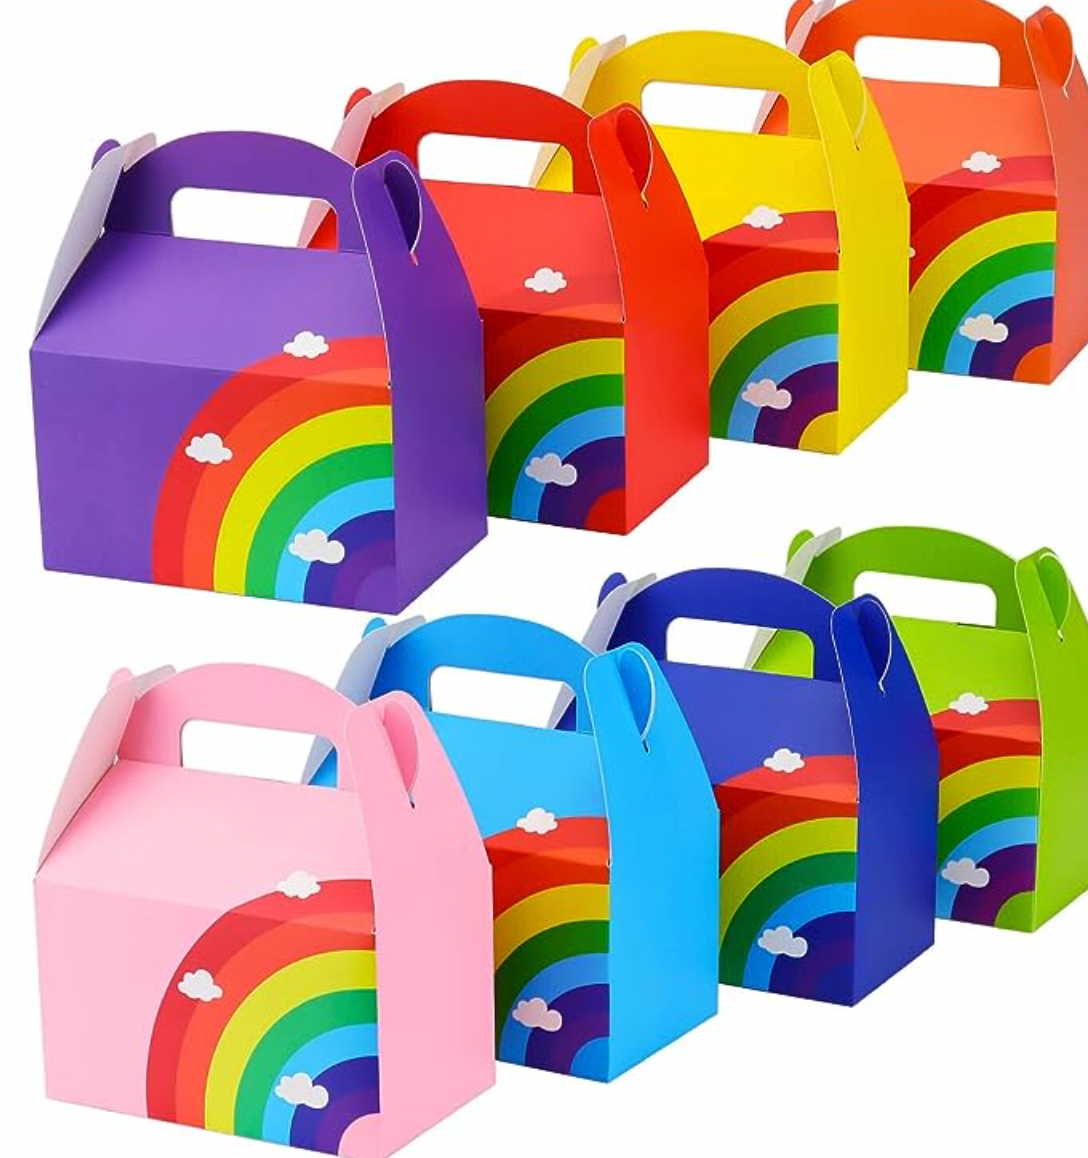 Rainbow party boxes